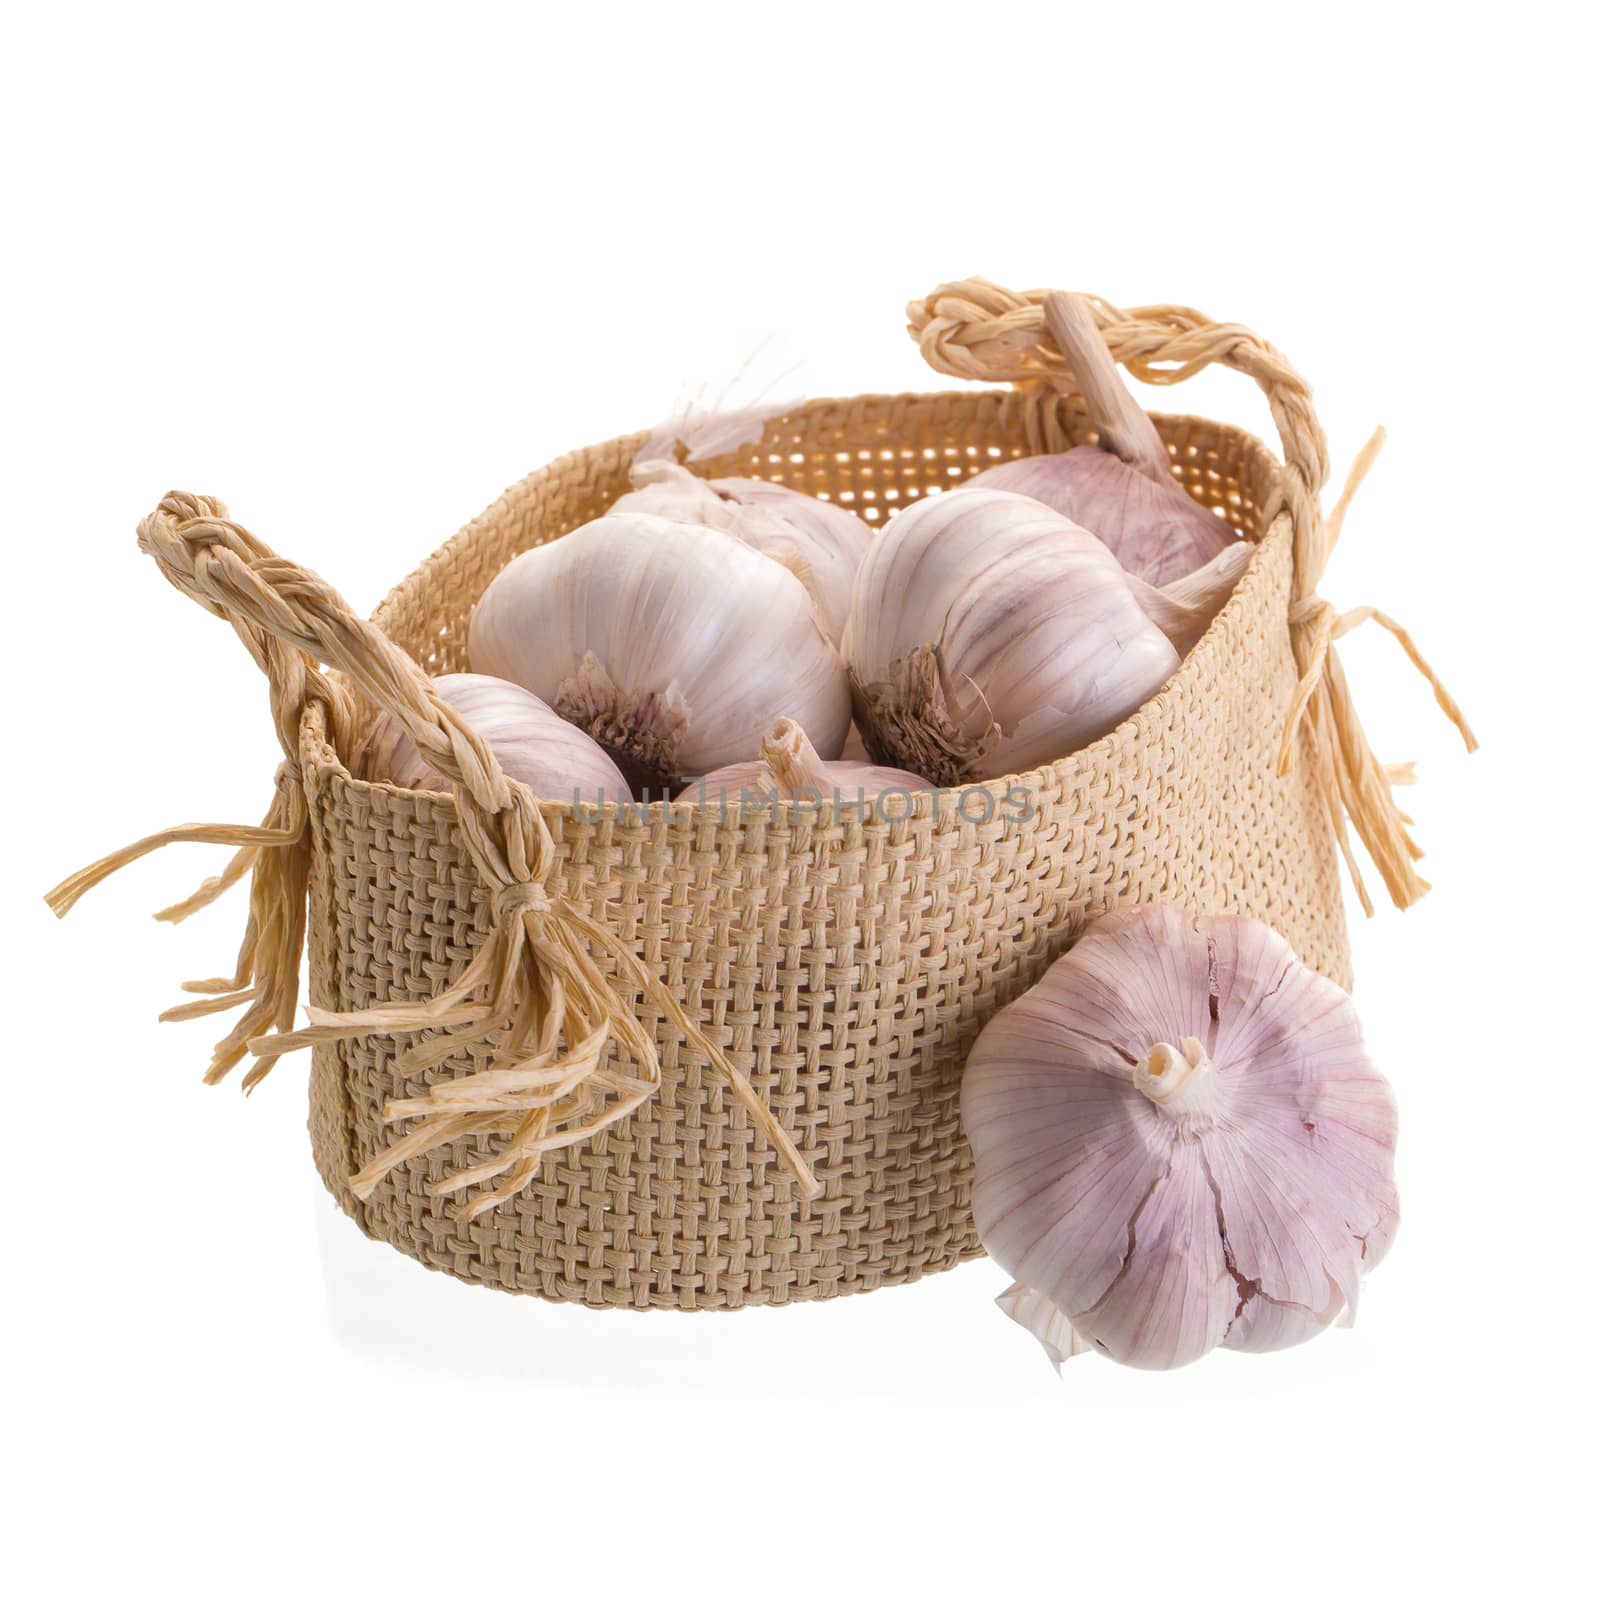 Garlic In the basket isolated on a white background.